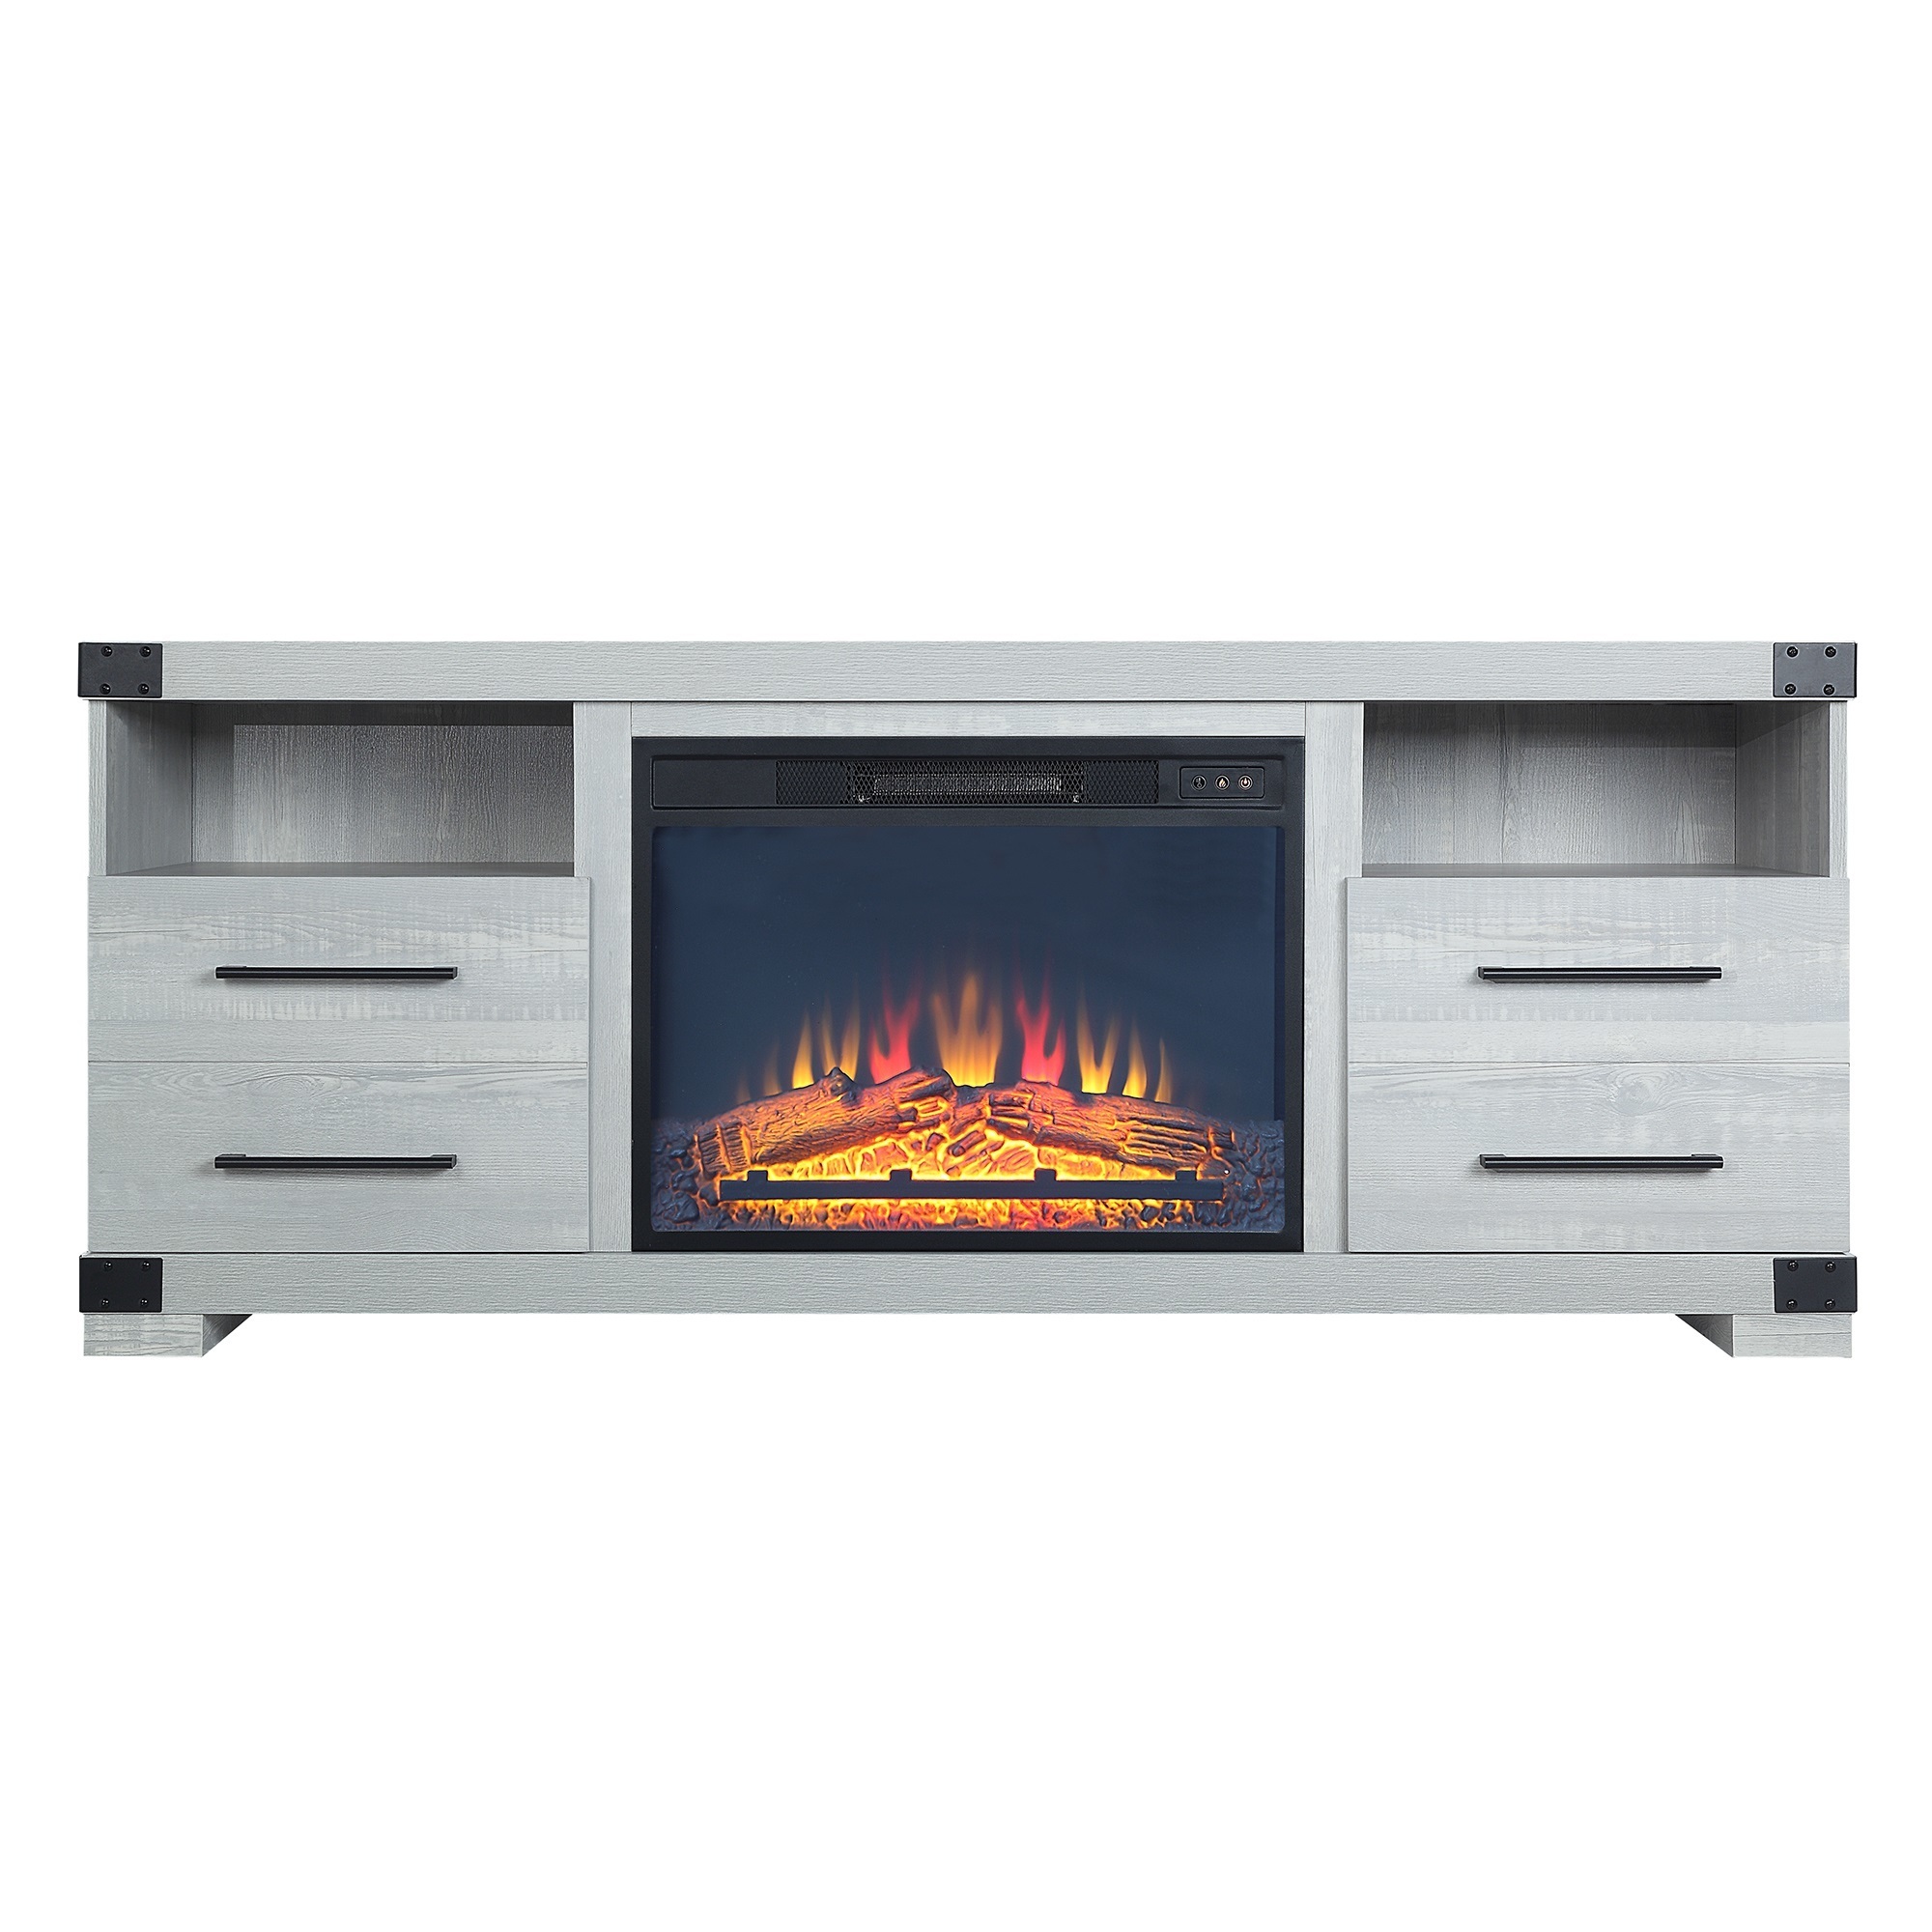 Manhattan Comfort, Richmond 60Inch Fireplace 2 Drawers and Shelves Grey, Width 60 in, Height 24 in, Depth 15 in, Model FP1